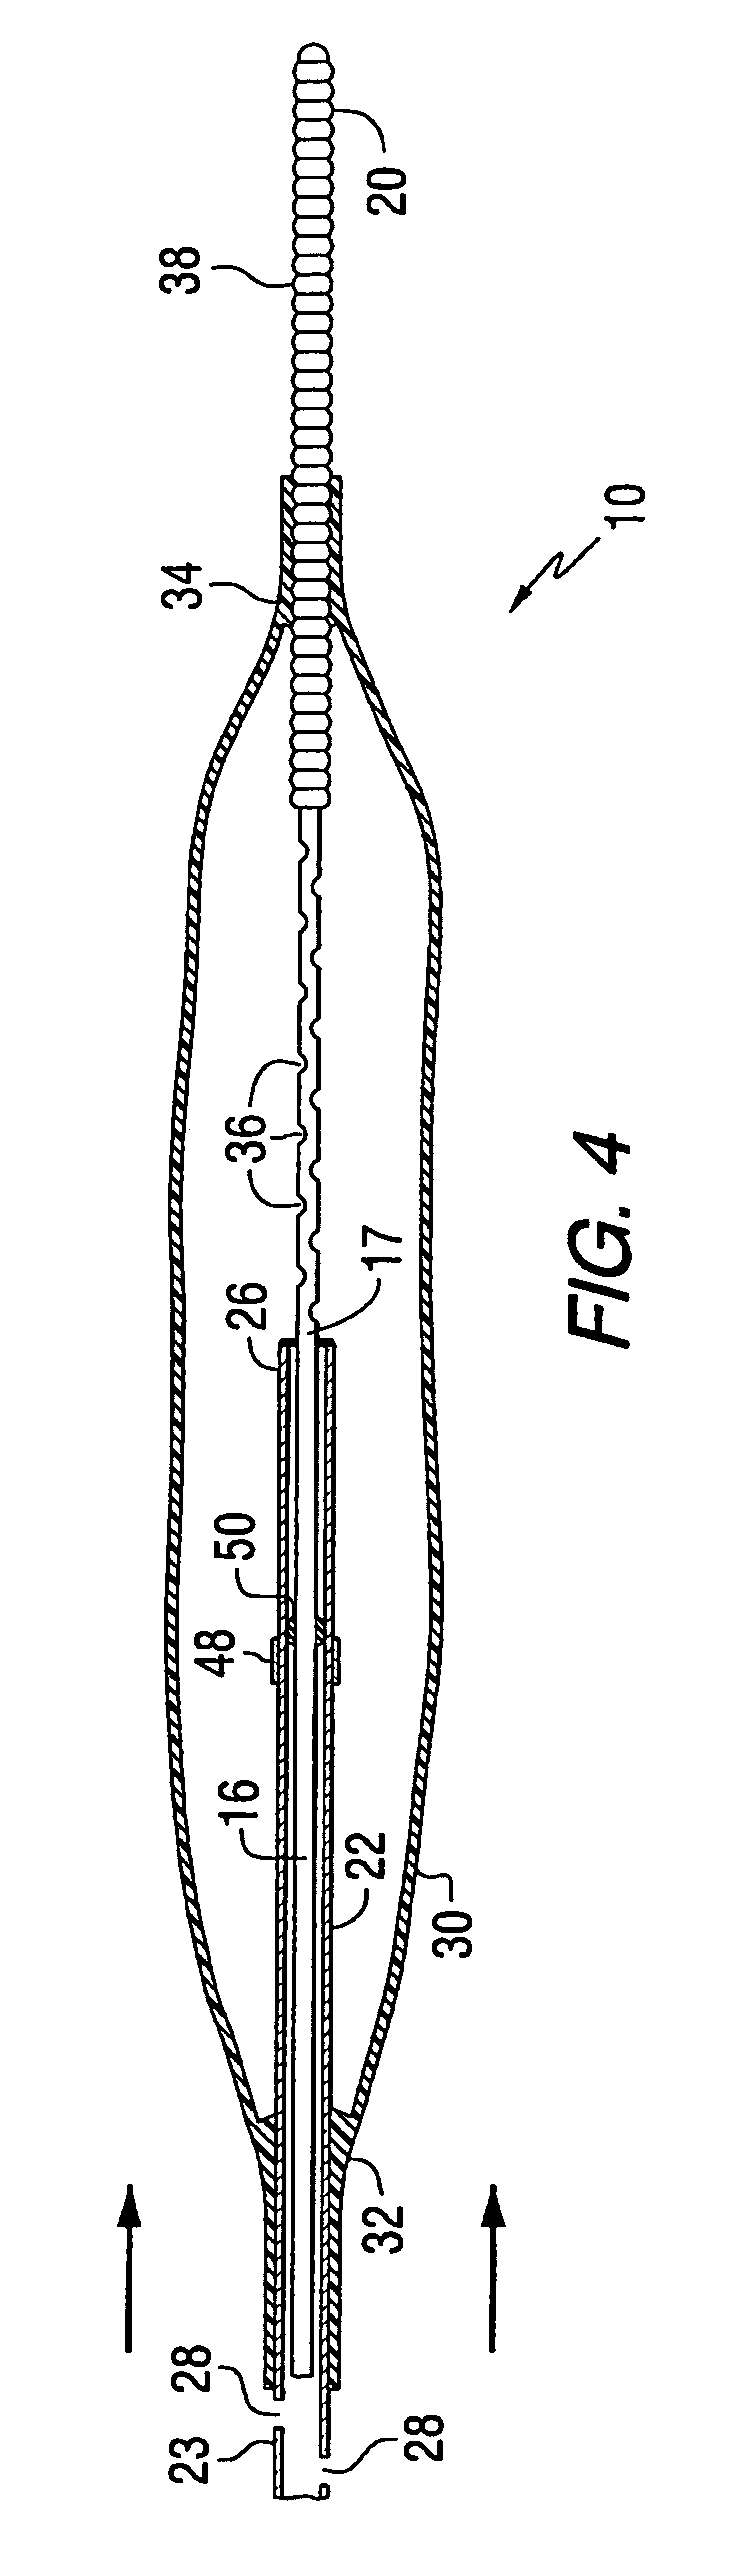 Apparatus for thromboembolic protection